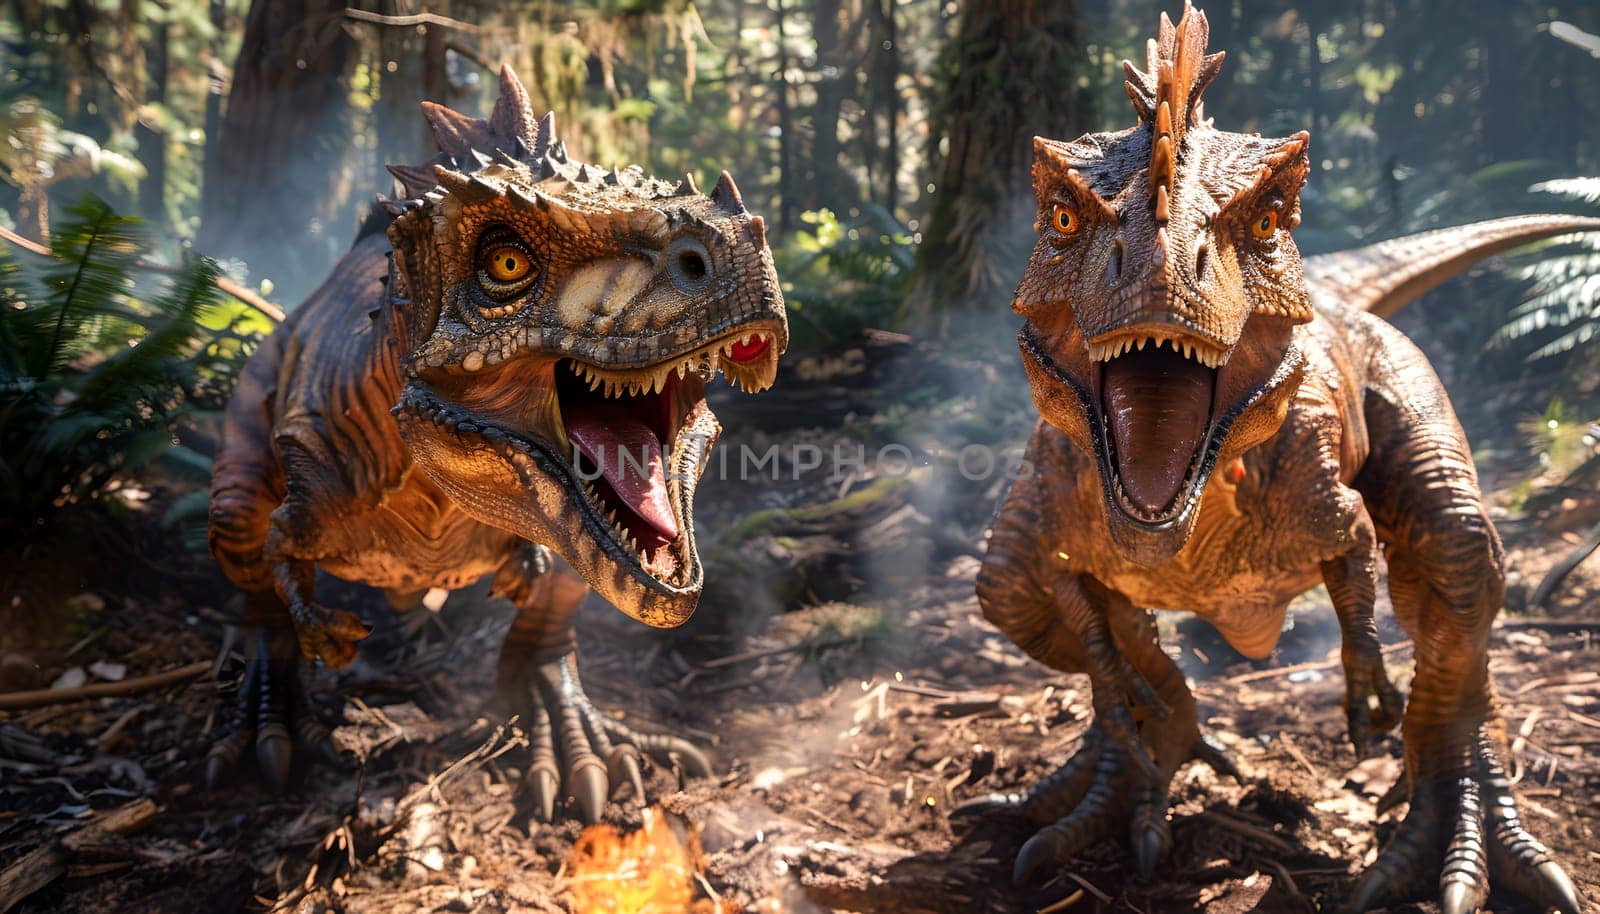 Two carnivorous dinosaurs with their jaws open are standing next to each other in the wood, resembling fictional characters in a supernatural jungle scene